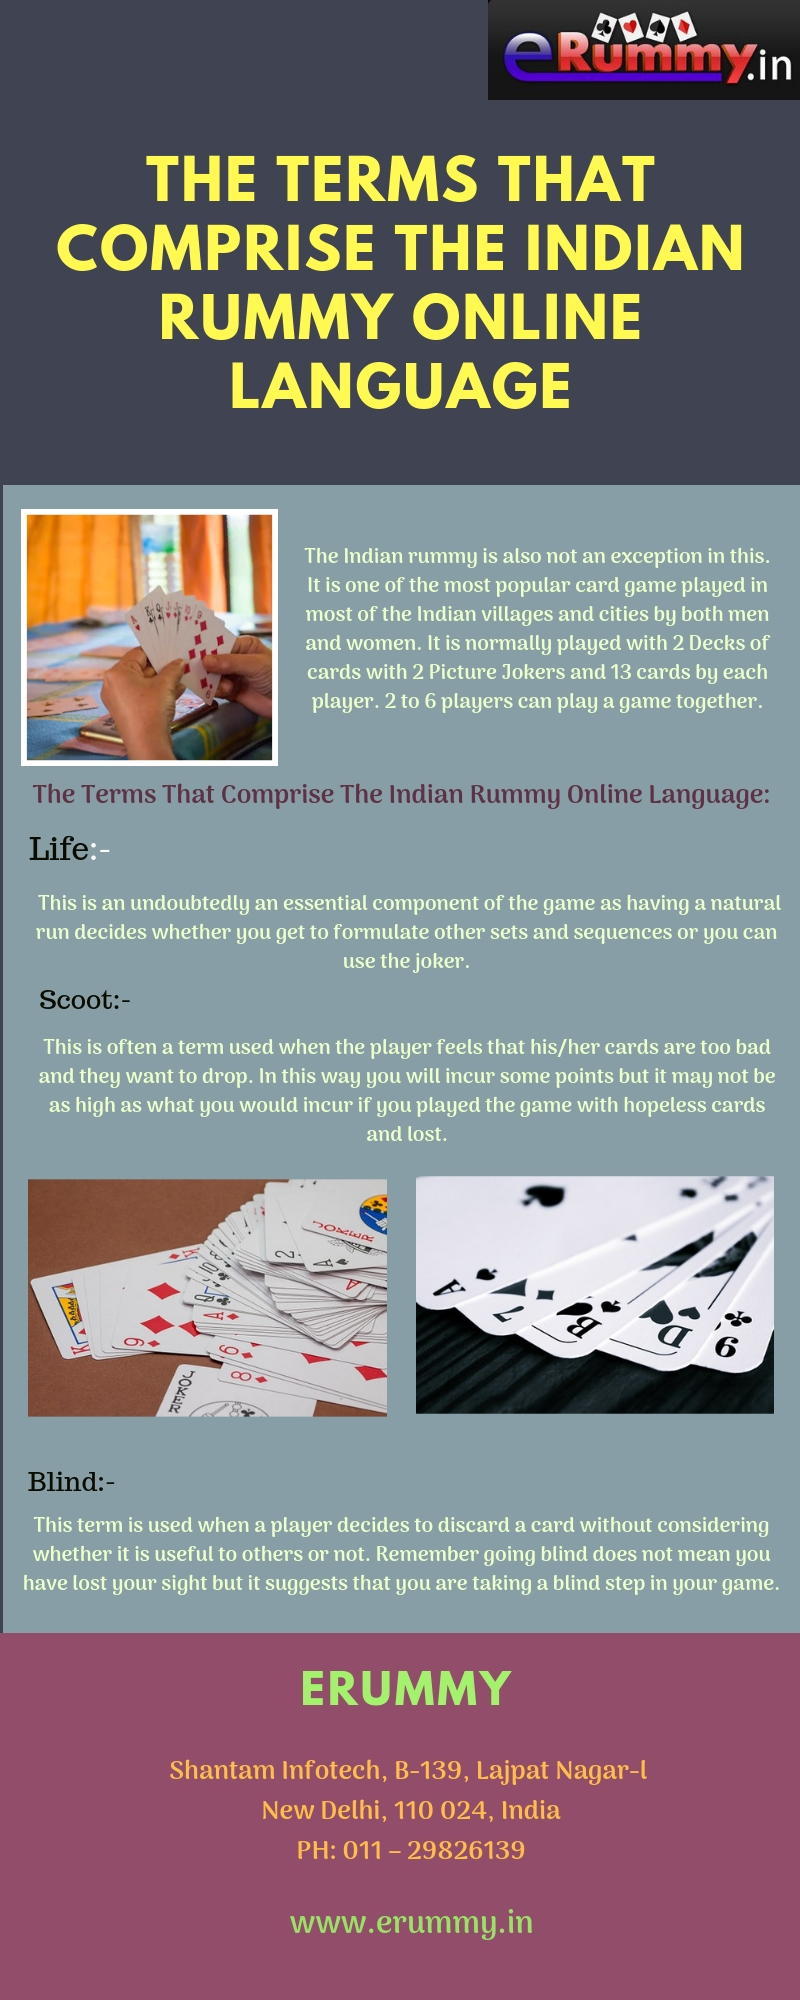 The Terms That Comprise The Indian Rummy Online Language.jpg Understanding the language of Indian rummy players will always give you an edge on any game. For more details, visit this link: https://bit.ly/2KERof7
 by Erummy